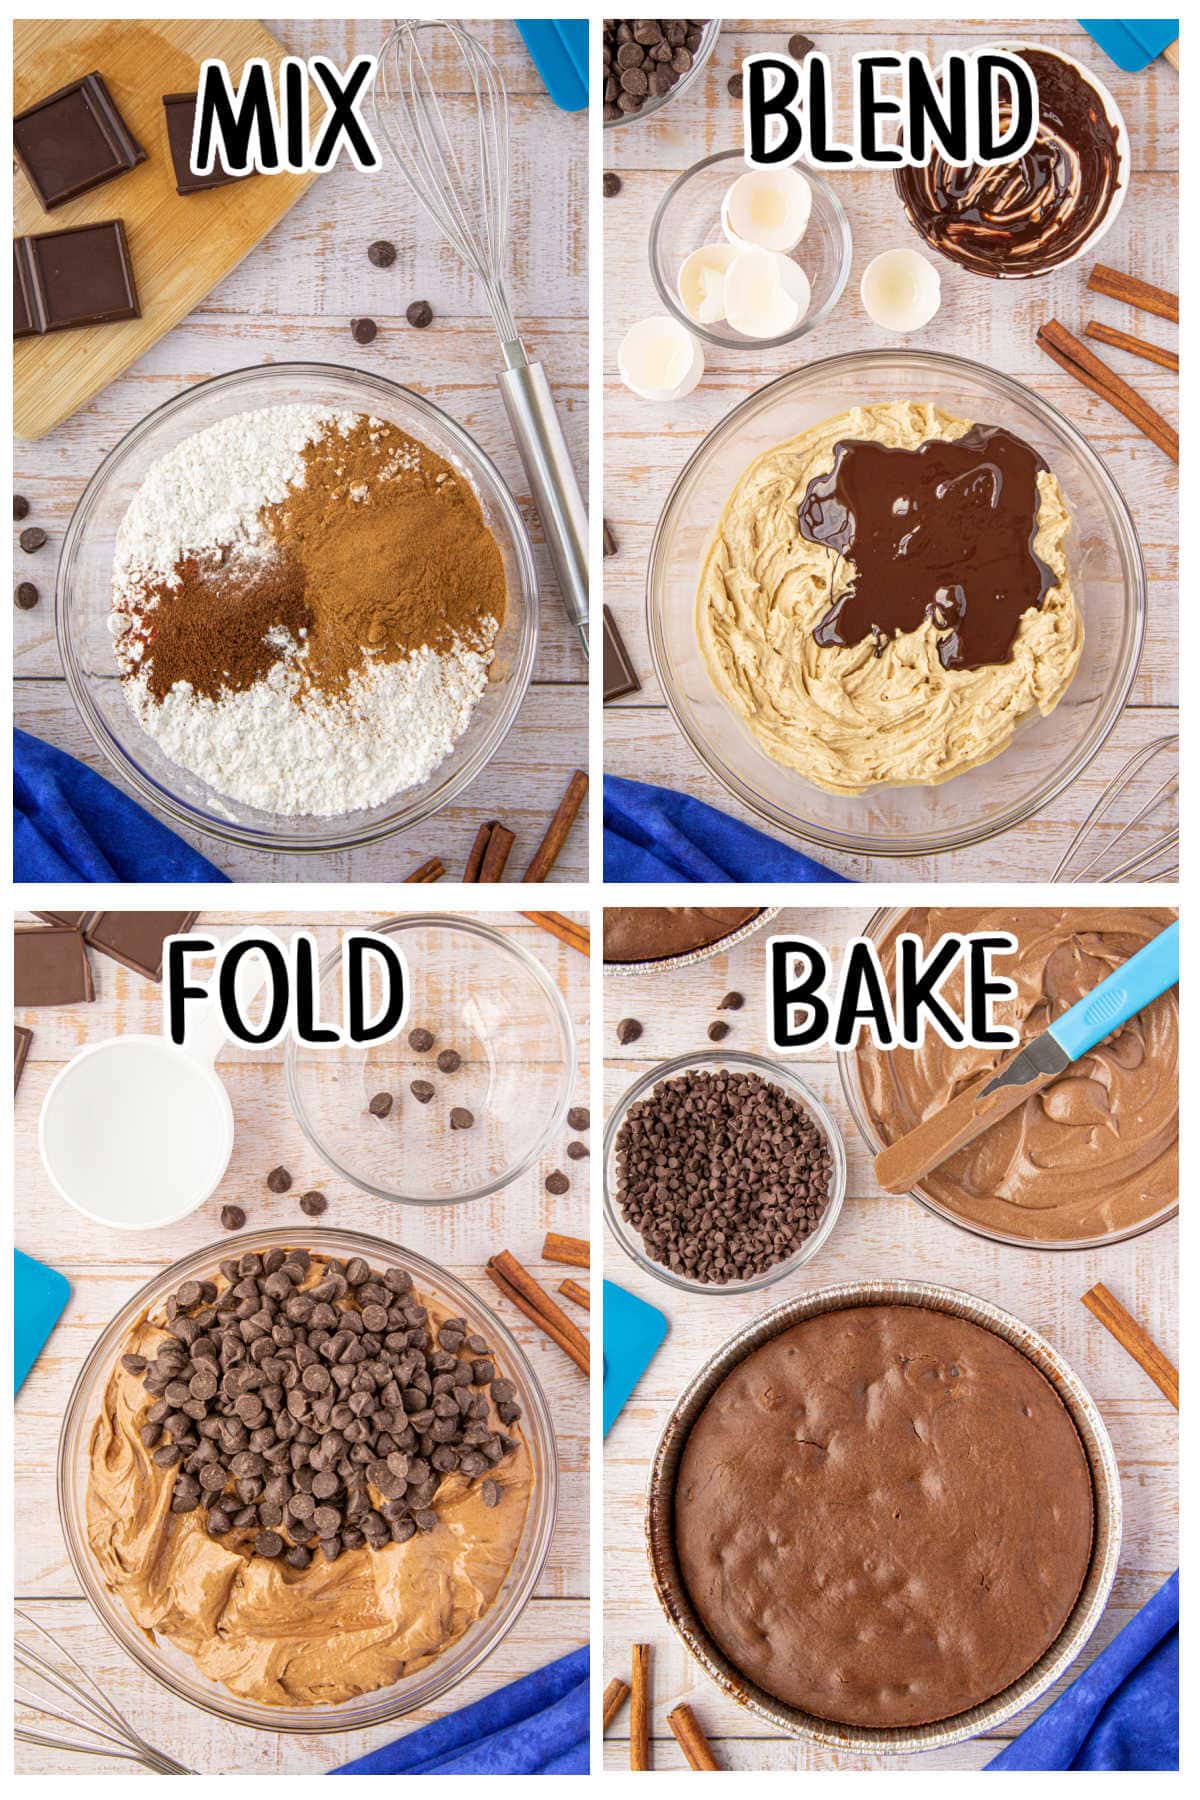 Collage of step by step images showing how to make this cake.